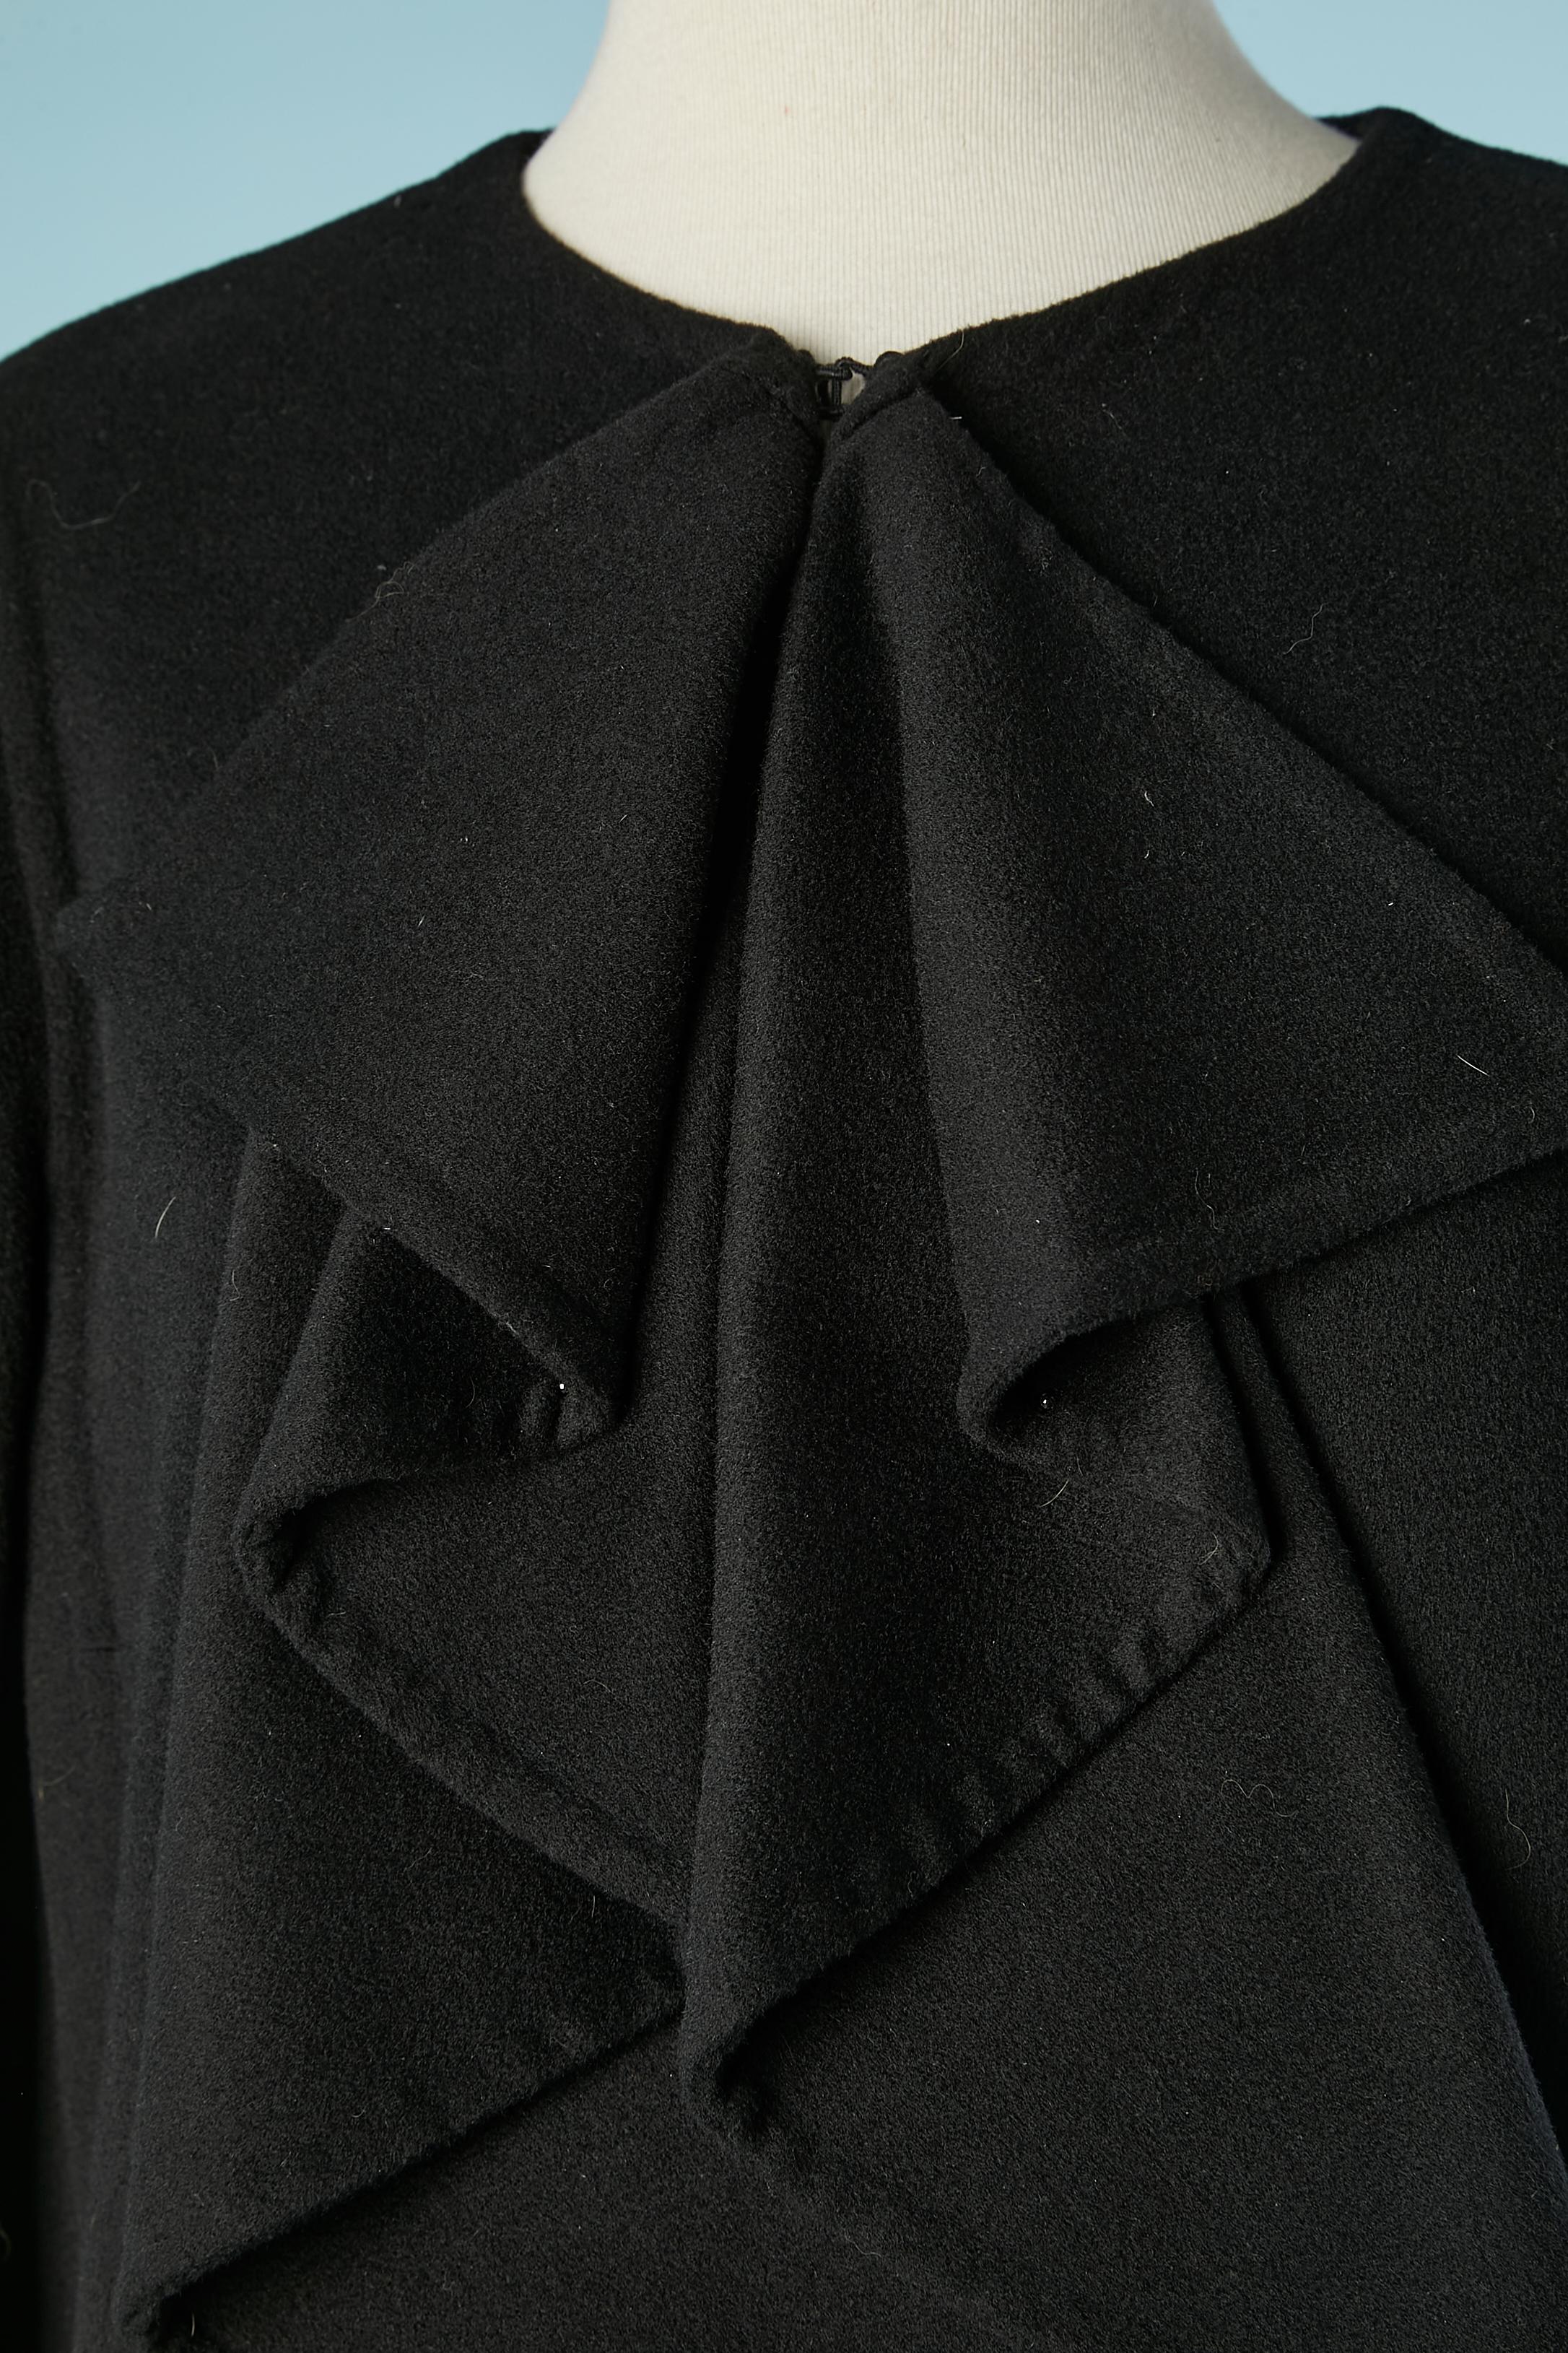 Black double-breasted wool and cashmere coat with leather flowers stitched on a leather laser-cut base on the bottom edge of the coat. One hook&eye on the top middle front. One snap in the middle front. Pockets. 
SIZE 44 (Fr) 14 (US) L 